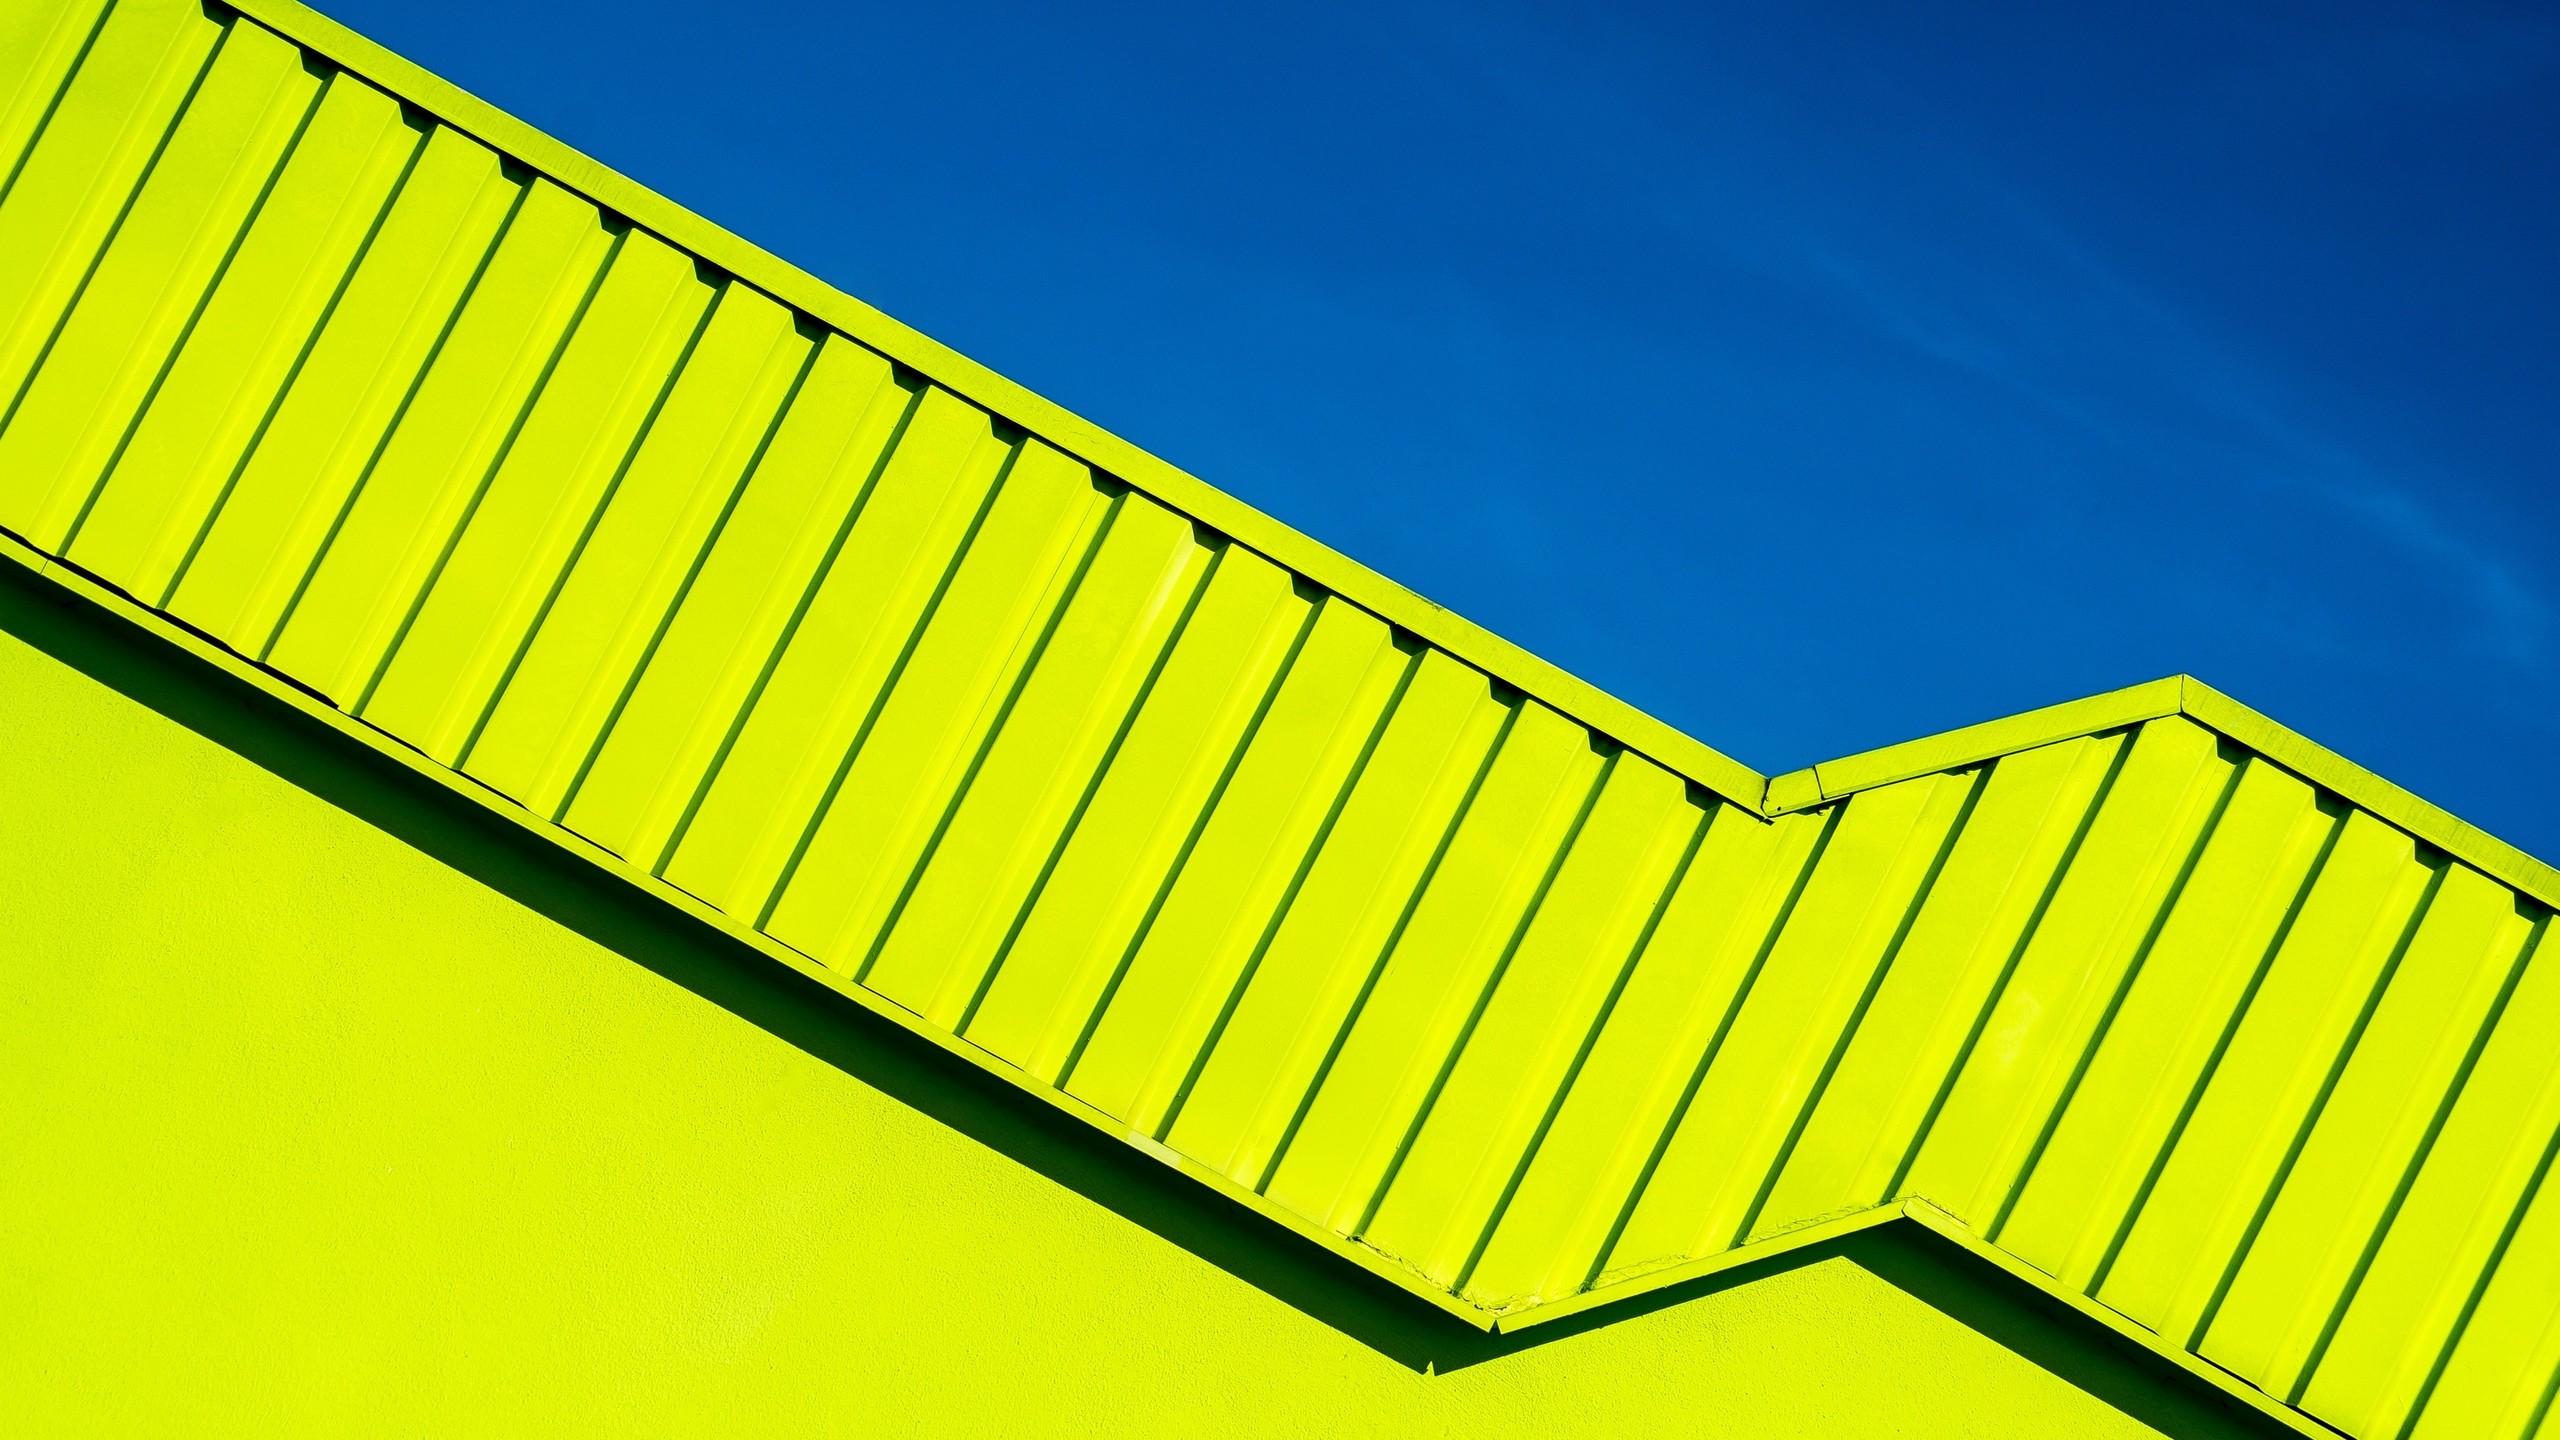 abstract, Architecture, Modern, Rooftops, Sky, Clear Sky, Blue, Yellow, Shadow, Minimalism Wallpaper